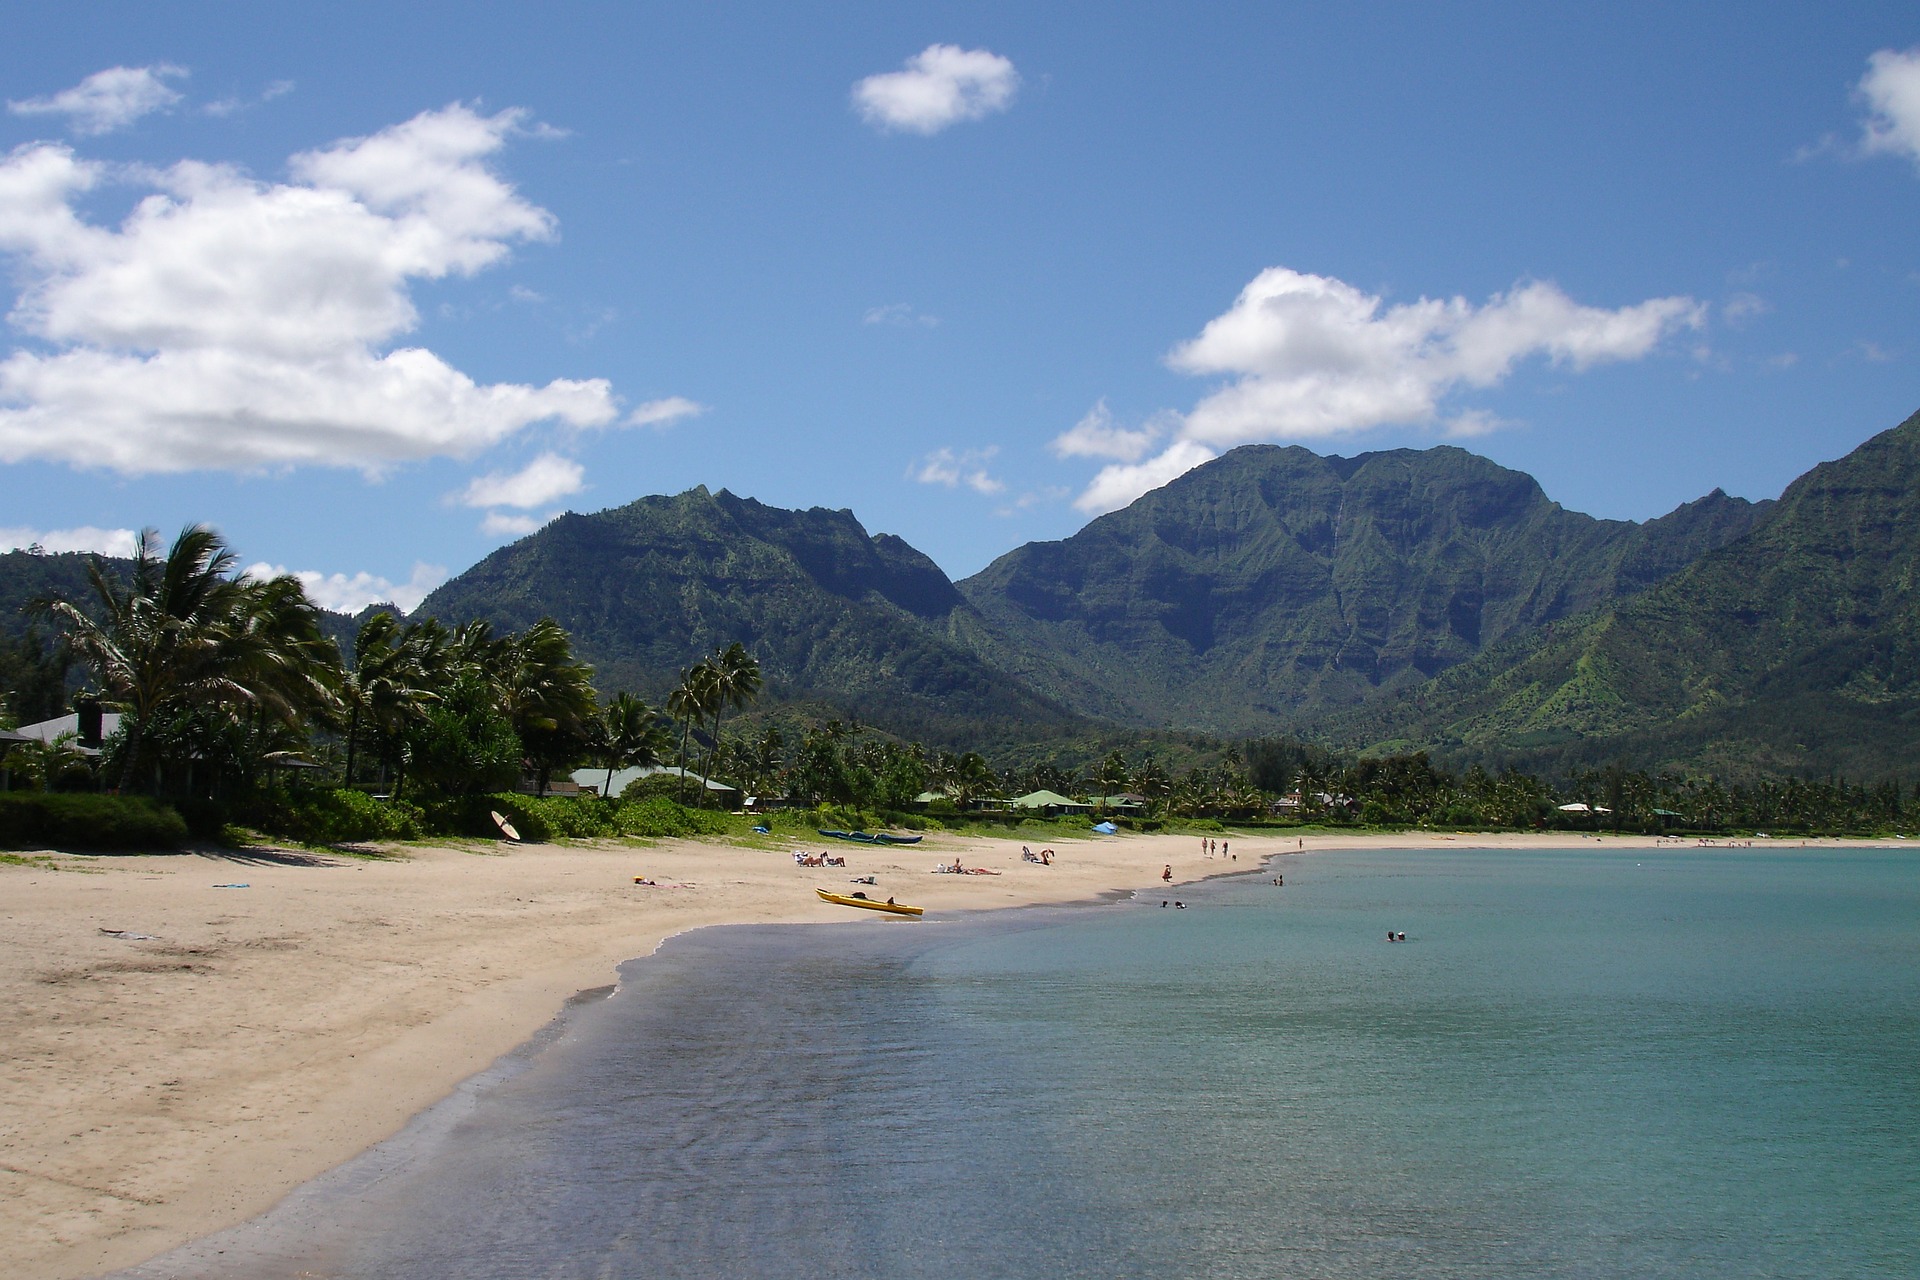 Quick access to the beach from our Kauai luxury house rentals.